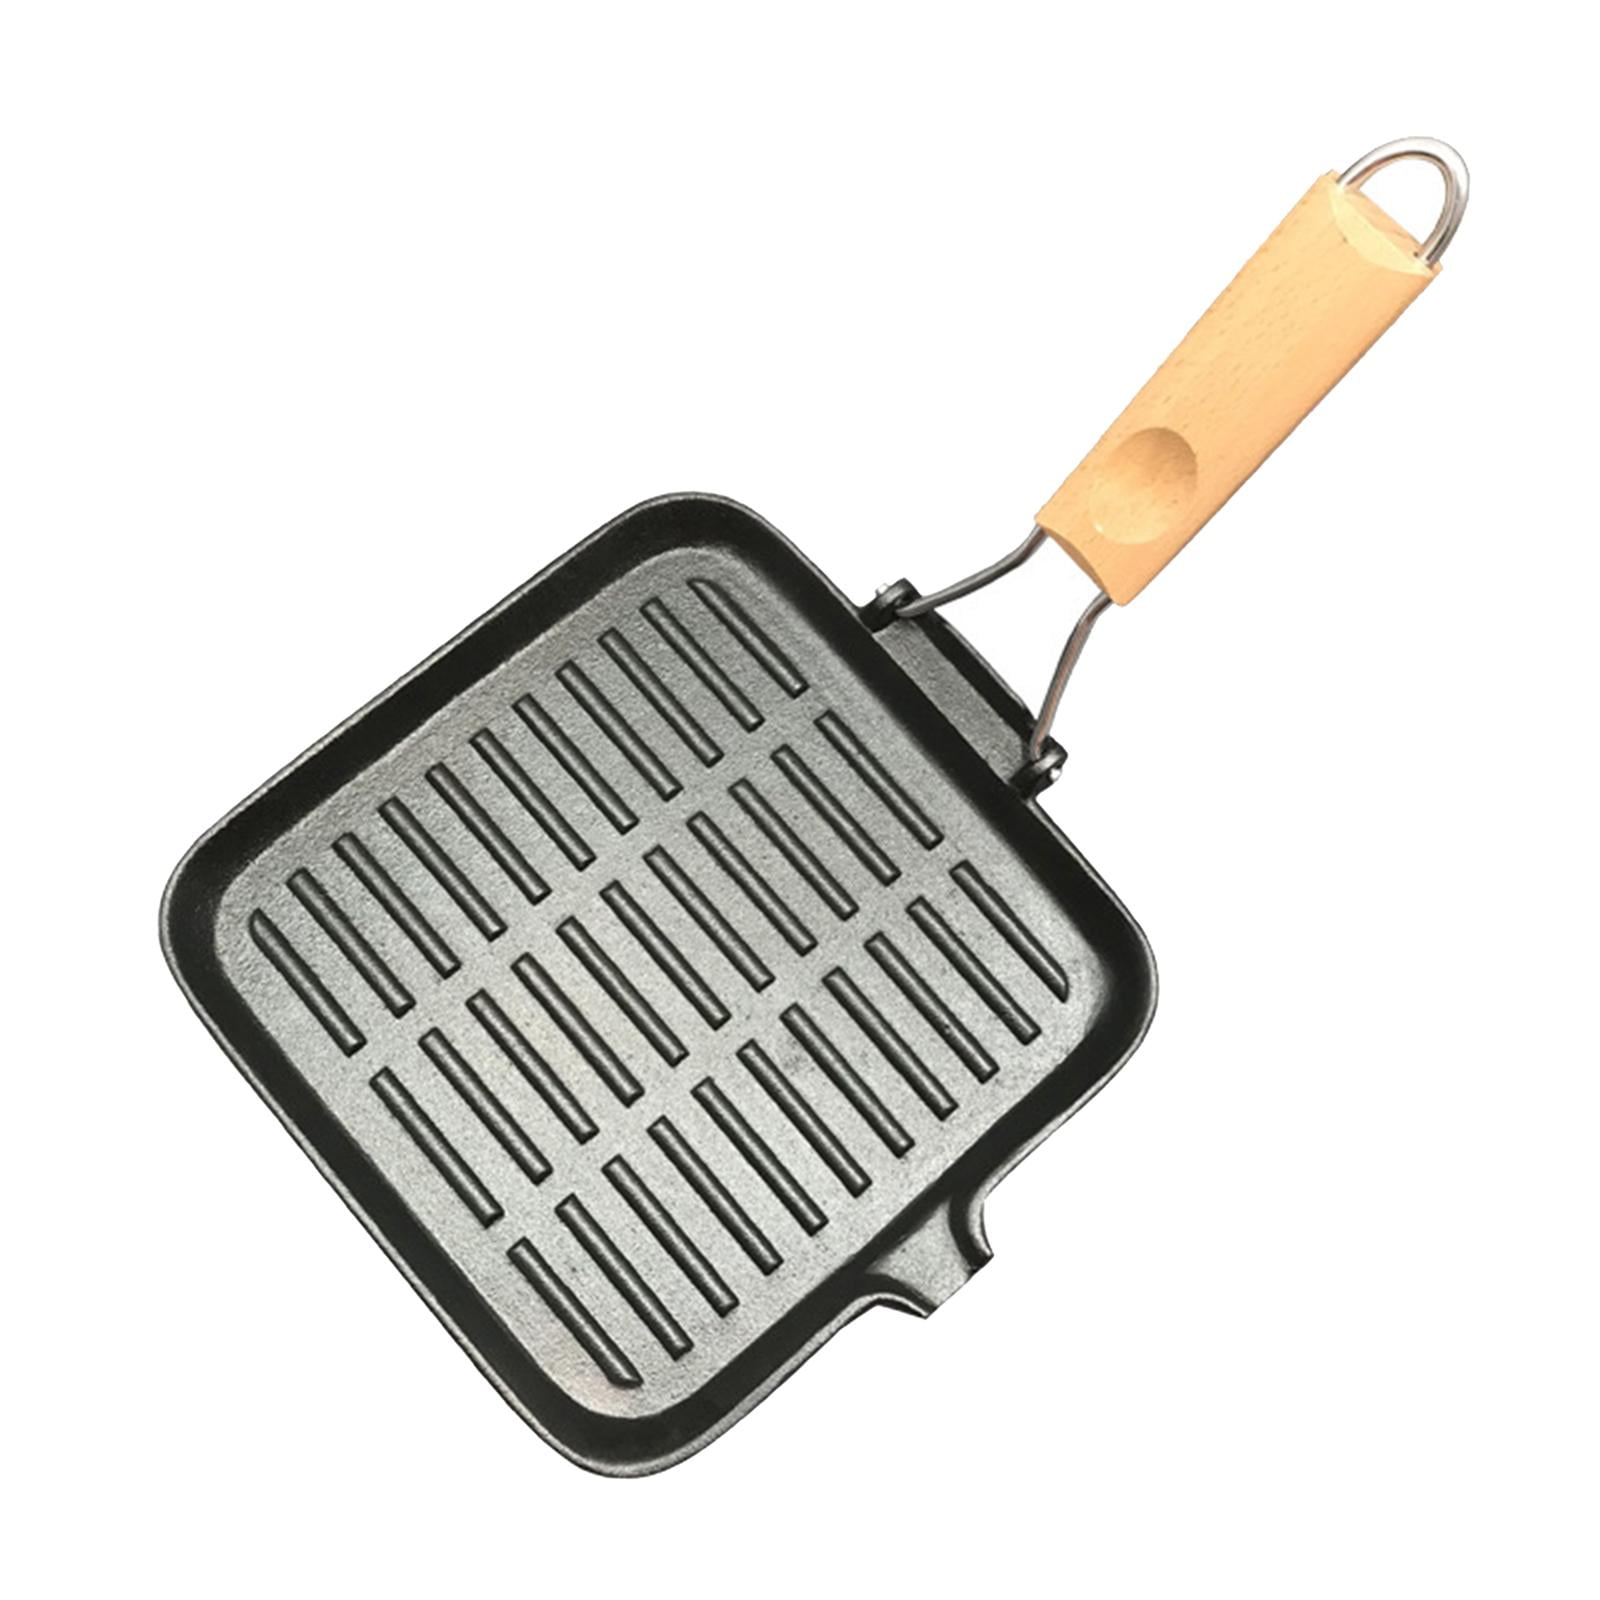 Anolon Square 9.5 Inch Grill Pan Griddle Pan 24cm Small Non Stick